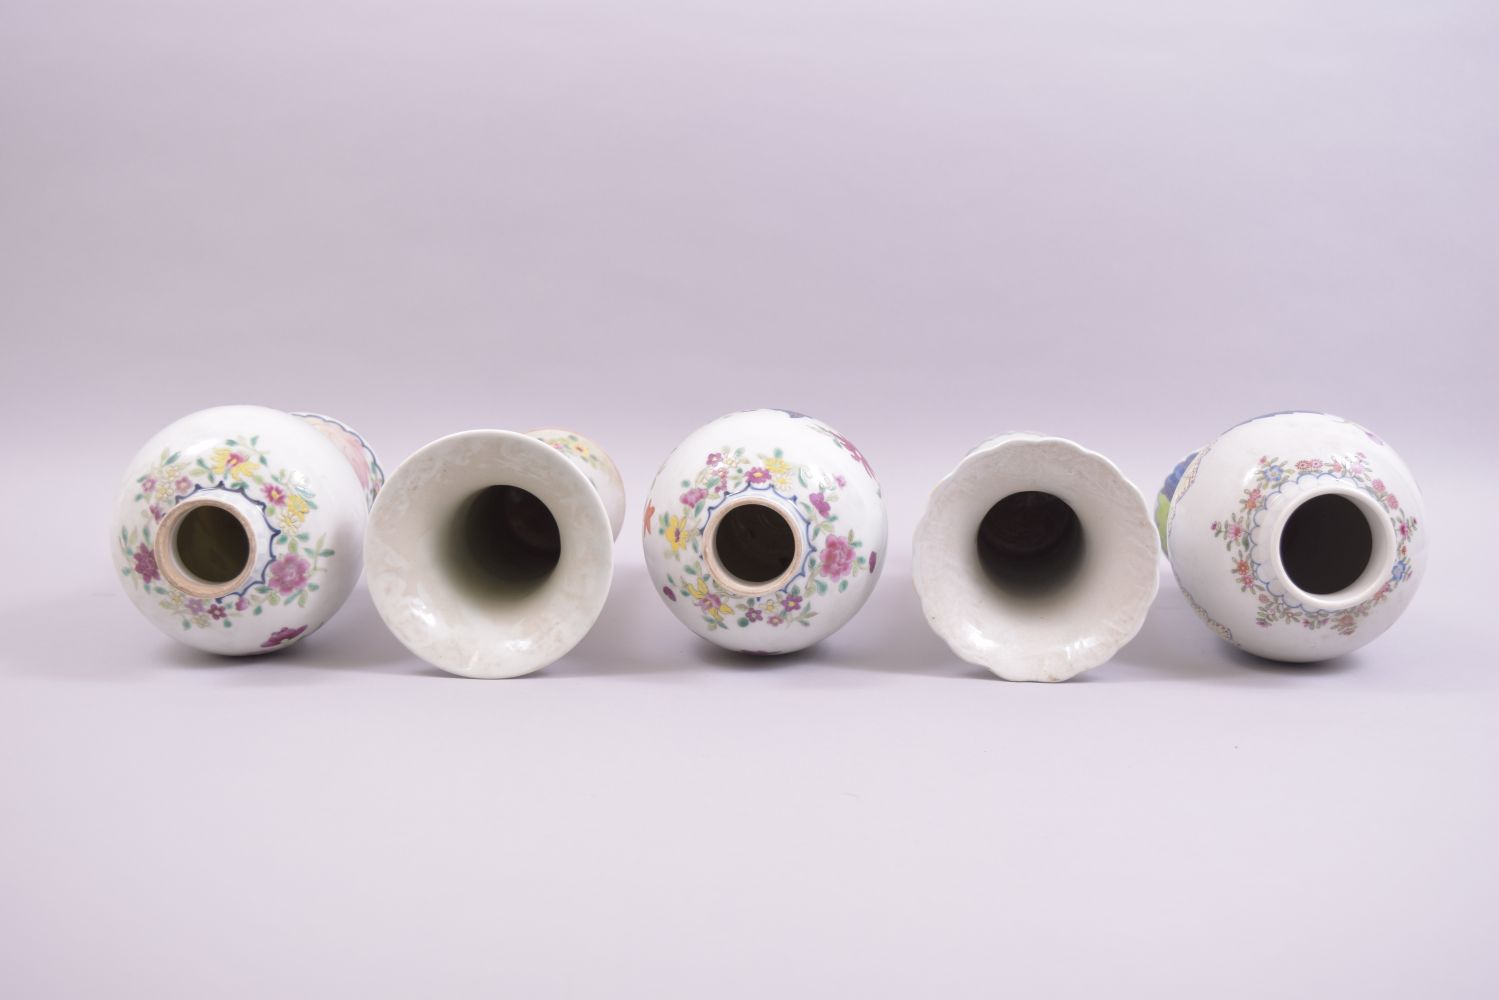 FIVE CHINESE FAMILLE ROSE PORCELAIN VASES, each painted with colourful floral sprays, various - Image 3 of 4